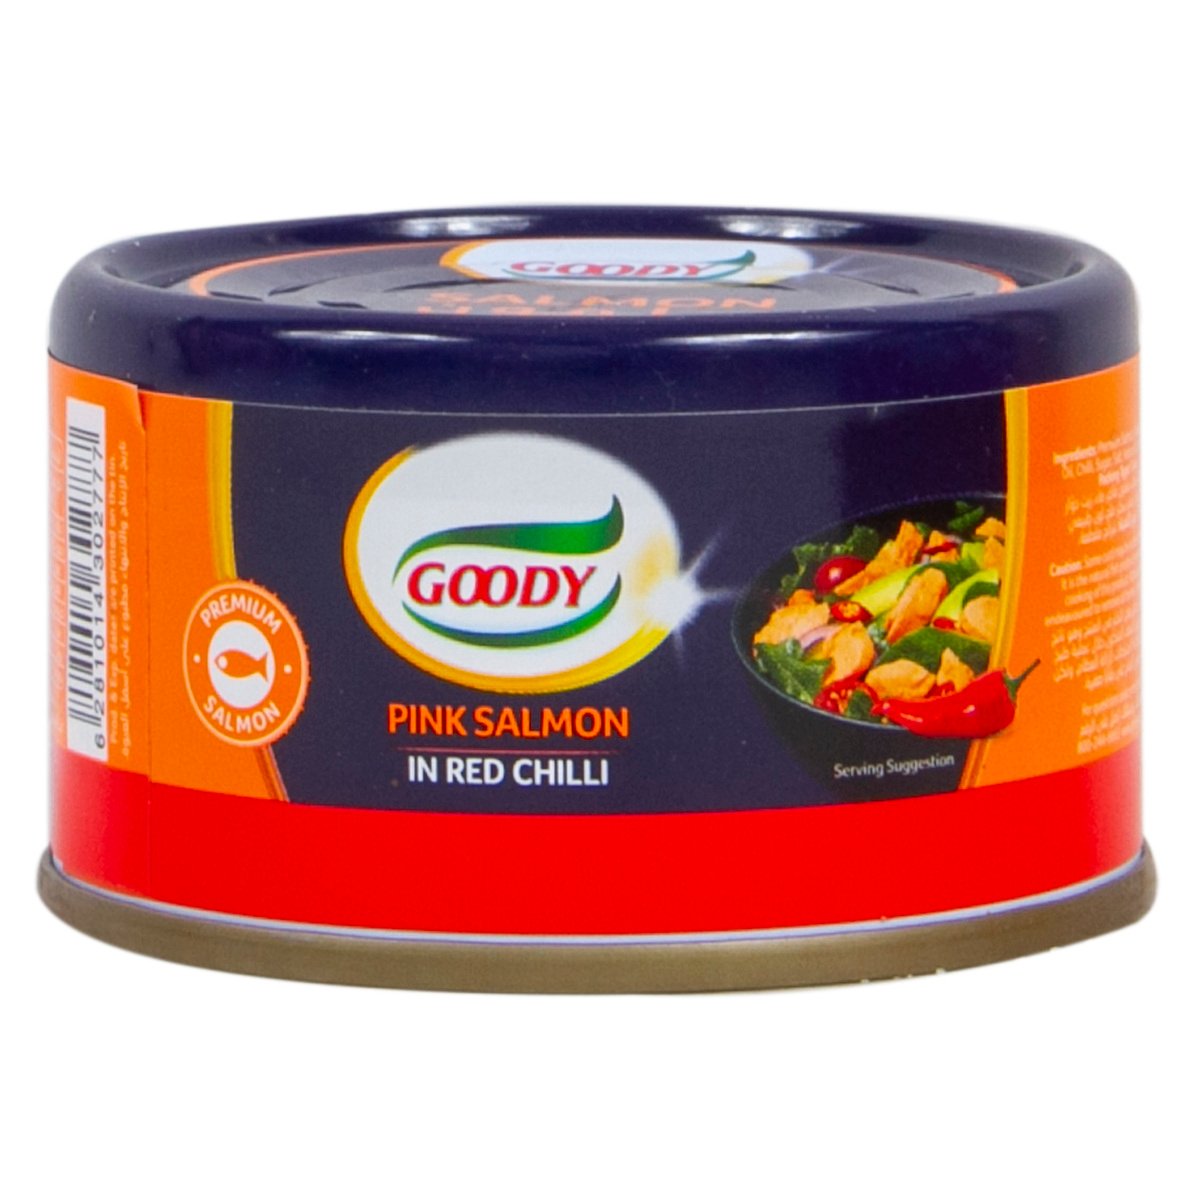 Goody Pink Salmon In Red Chilli 48g